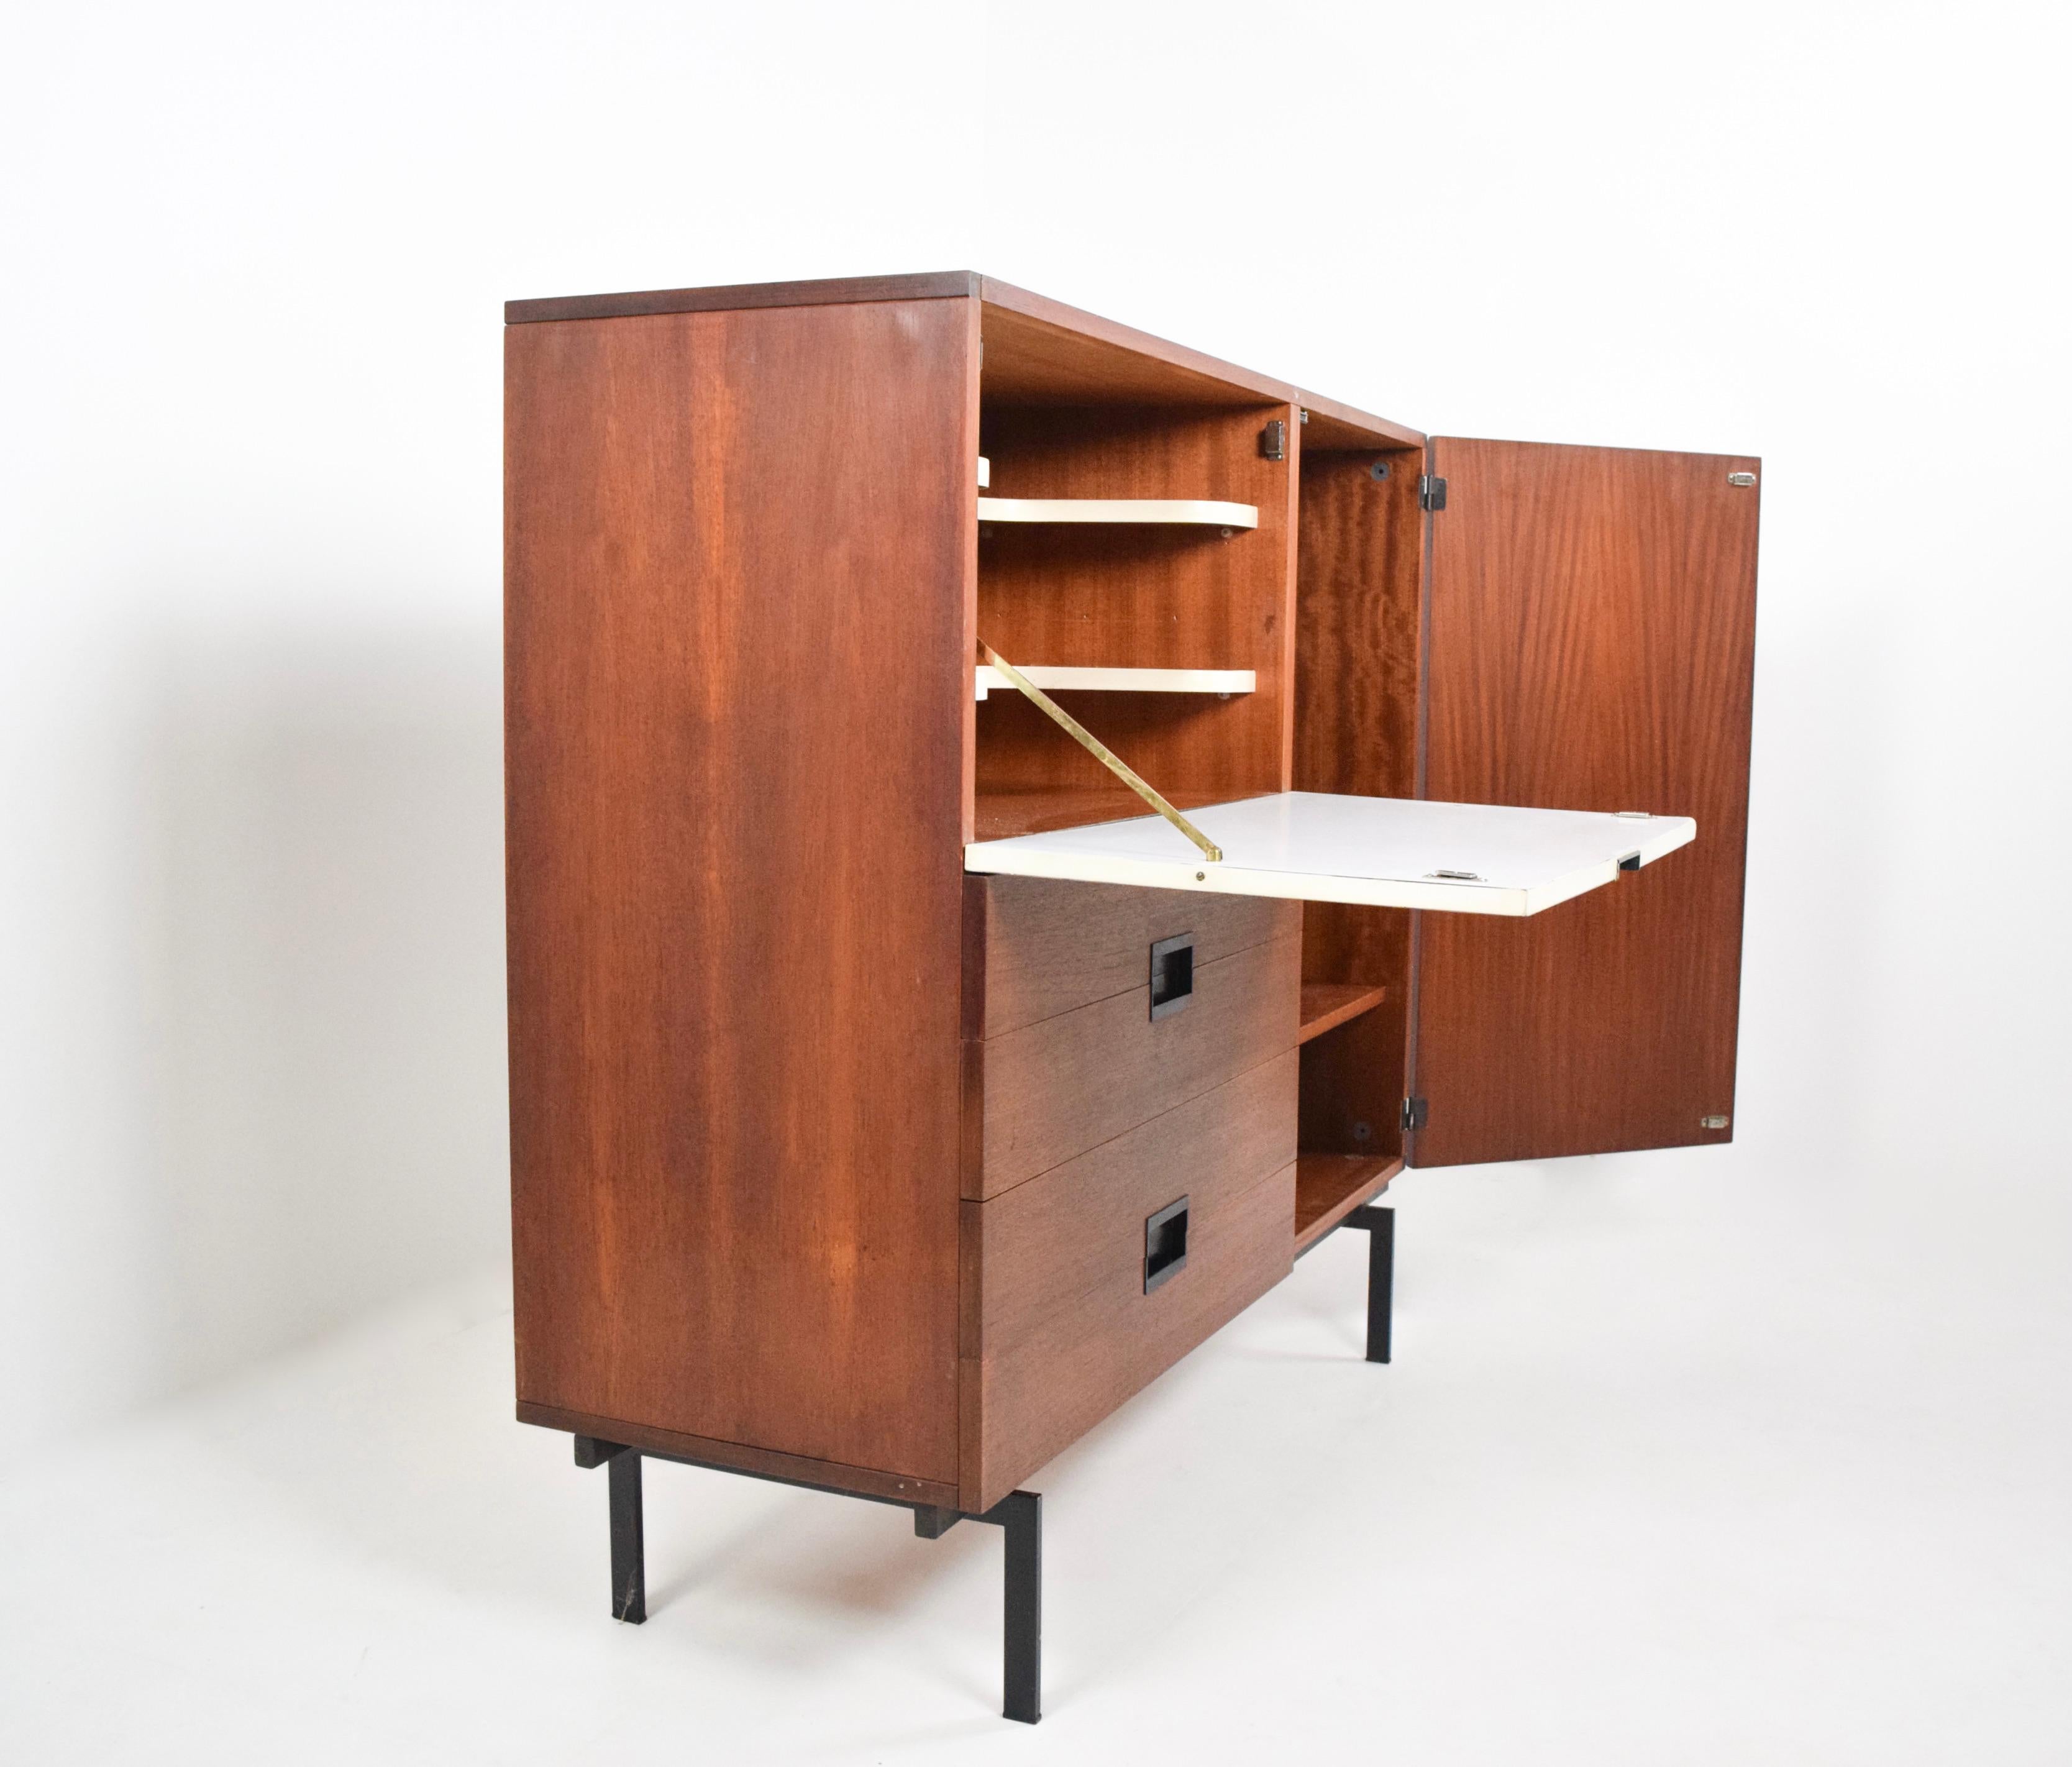 Mid-20th Century Highboard CU06 by Cees Braakman for Pastoe, Japan Series, The Netherlands 1960s